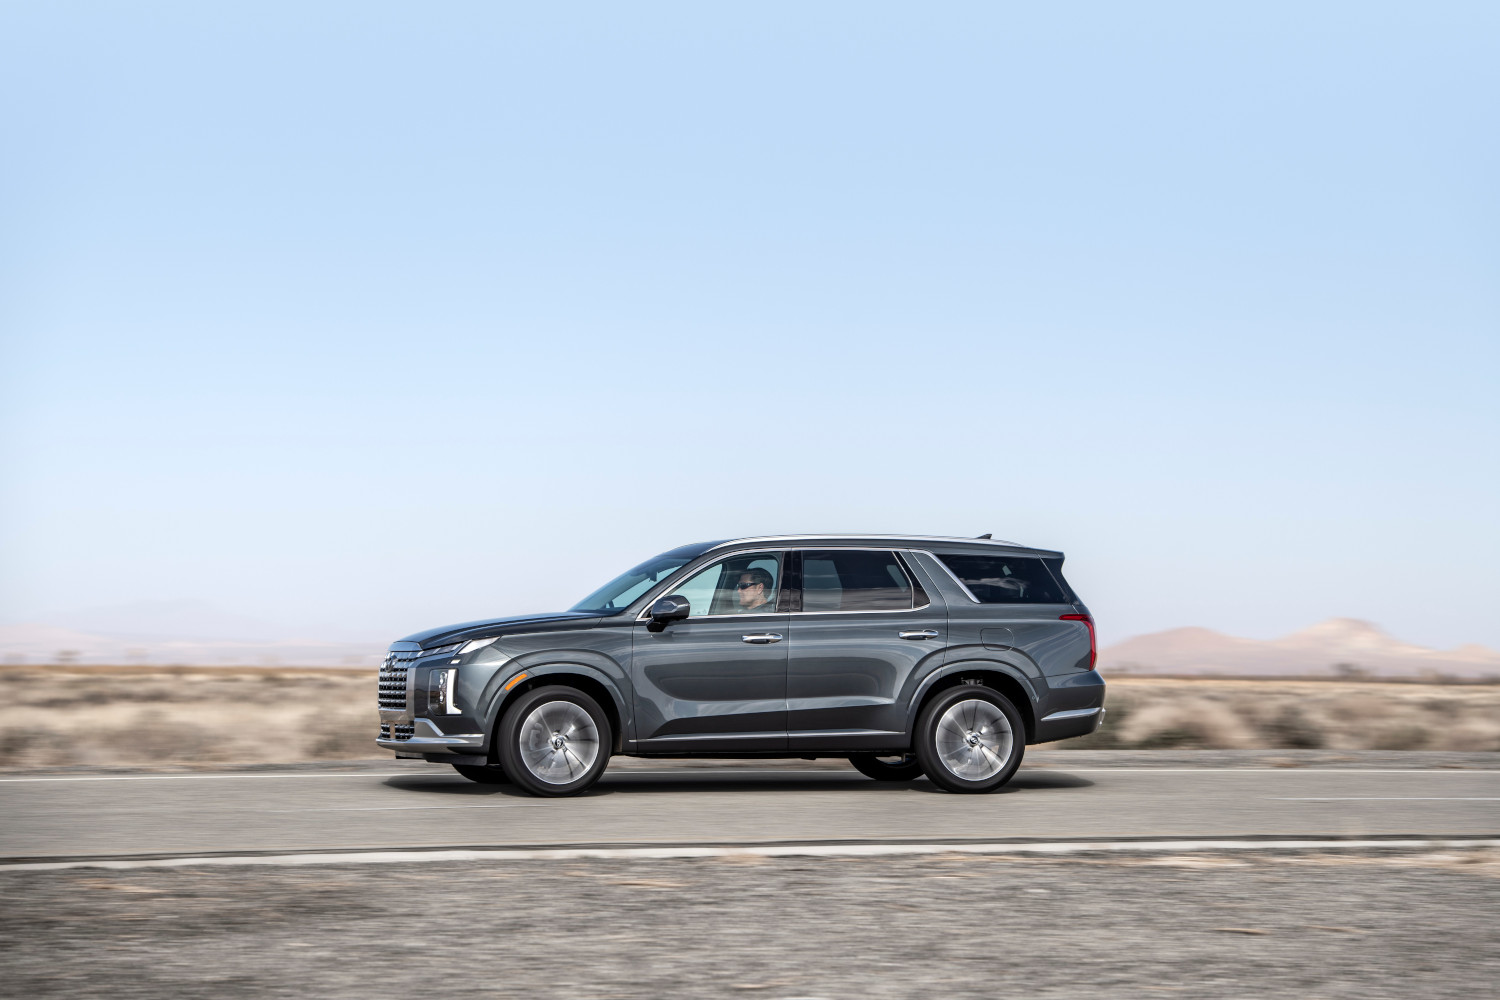 The best SUVs for the money include this 2023 Hyundai Palisade